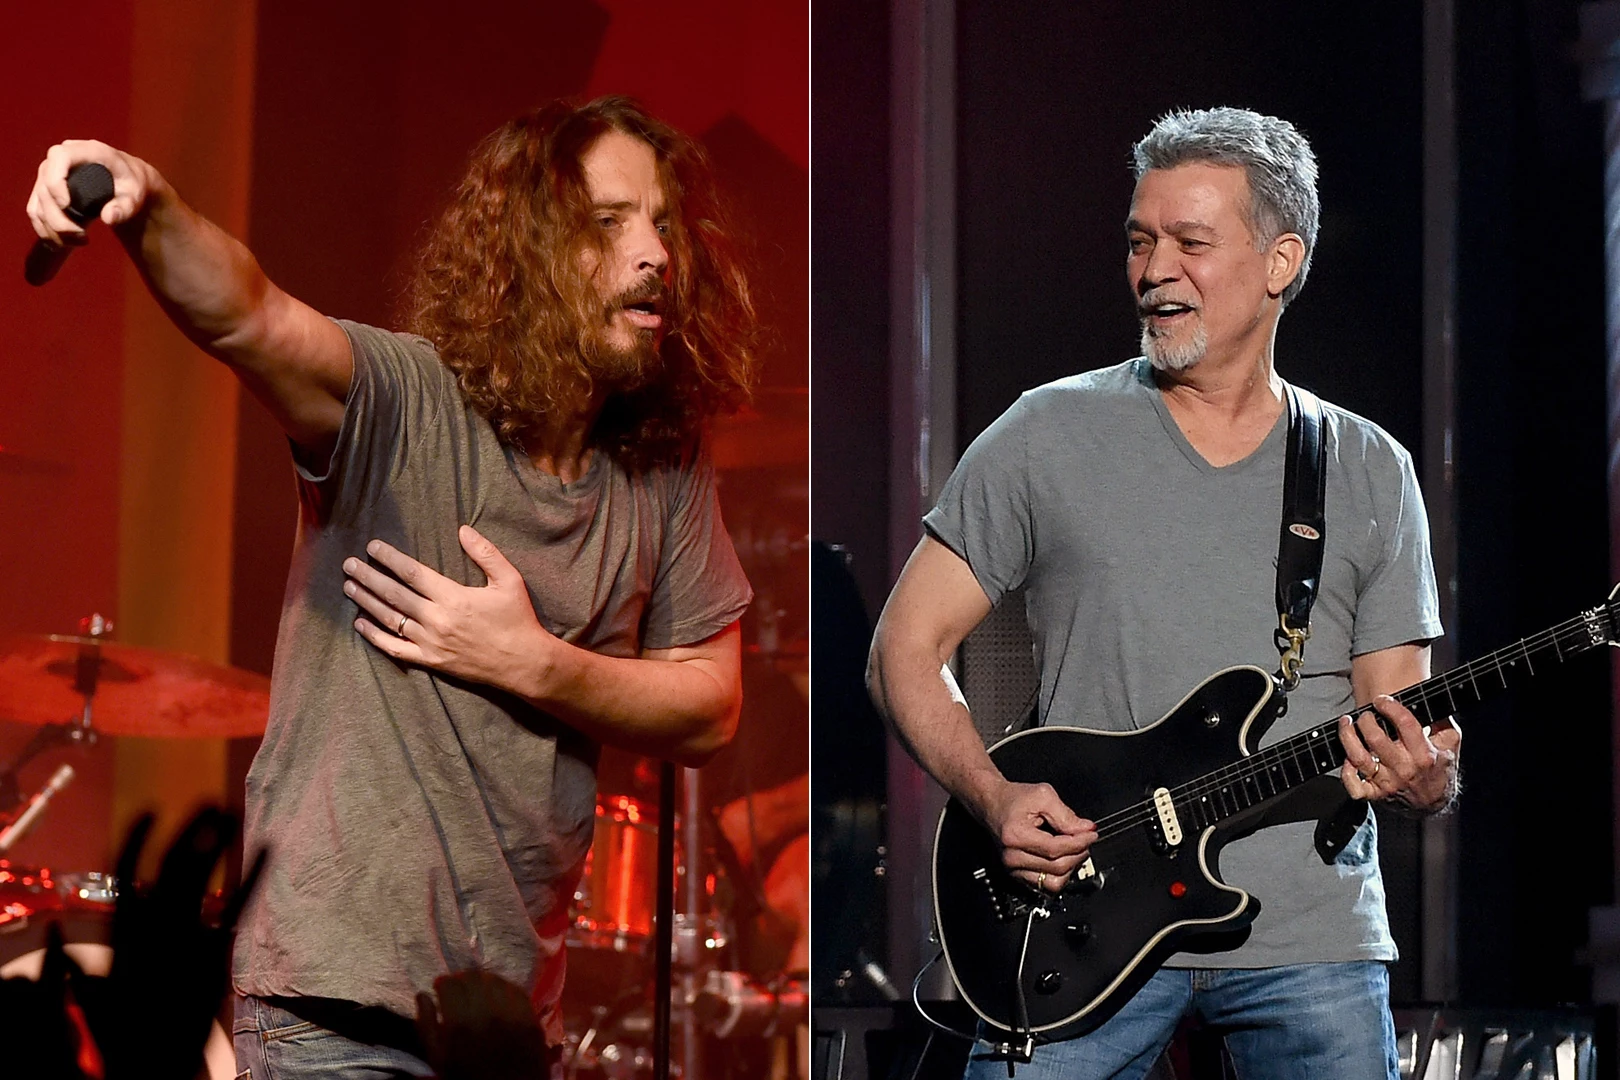 Chris Cornell + Eddie Van Halen Nearly Collaborated on a Song